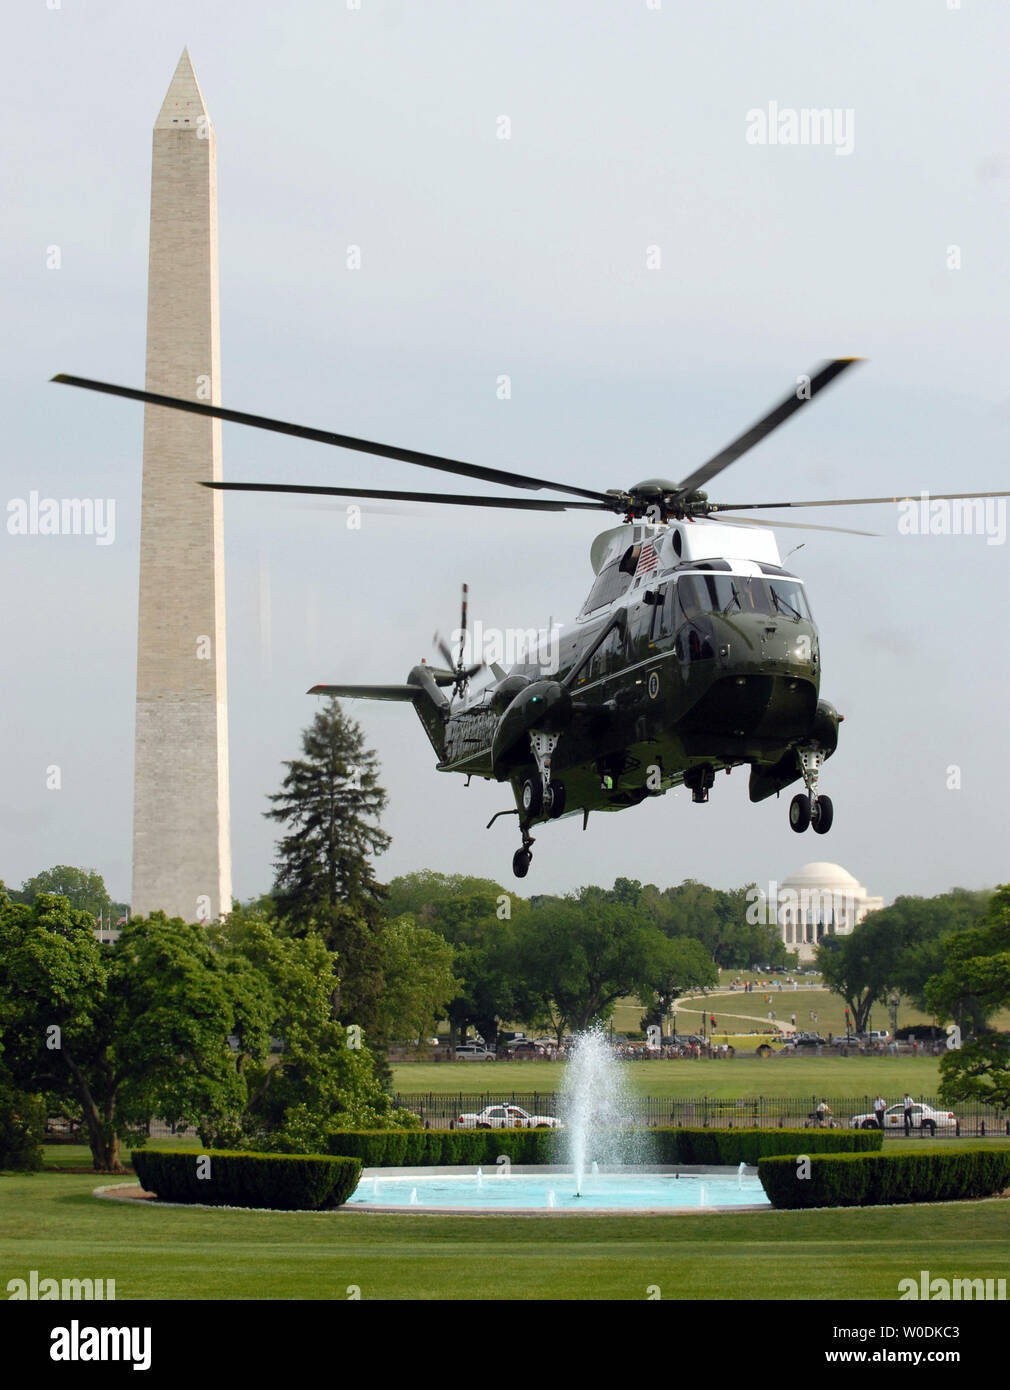 U.S. President George W. Bush and First Lady Laura Bush arrive aboard Marine One on the South Lawn of the White House in Washington on May 21, 2007. Bush spent the meeting at his ranch in Crawford, Texas.   (UPI Photo/Roger L. Wollenberg) Stock Photo